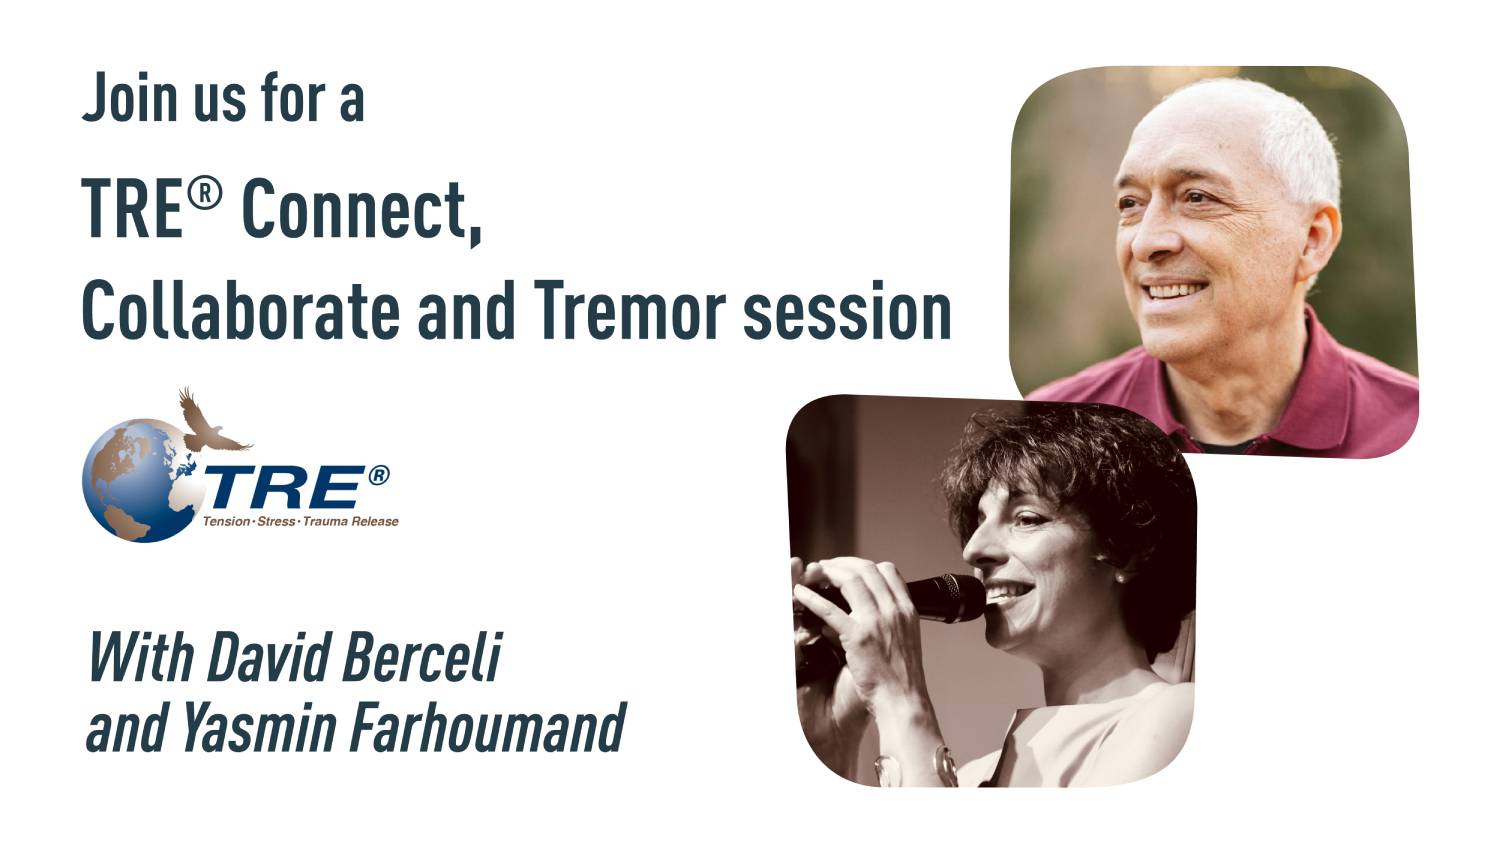 A TRE® Connect, Collaborate and Tremor session led by David Berceli and Yasmin Farhoumand